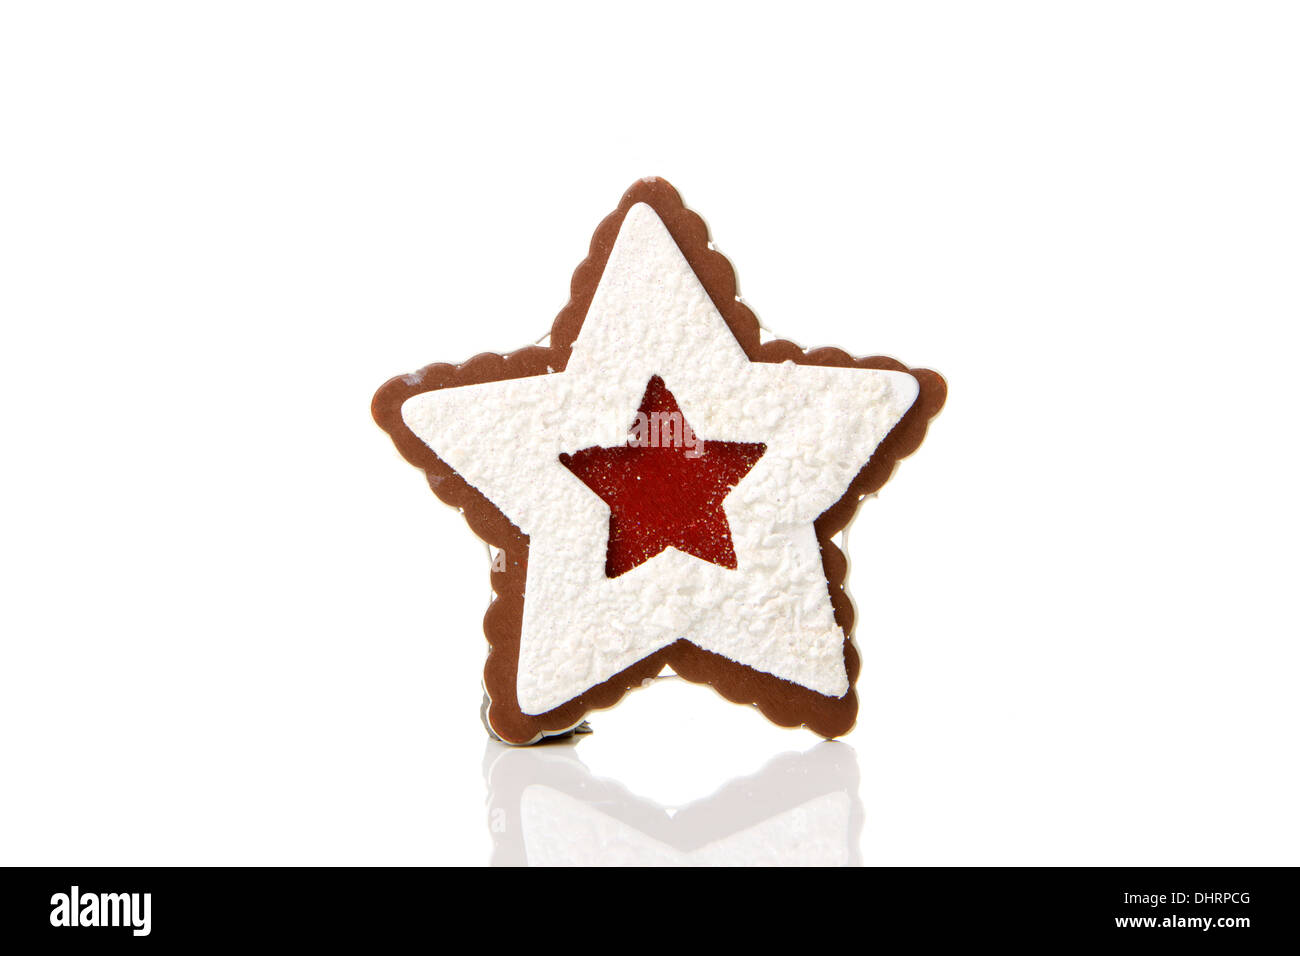 Gingerbread star as a Christmas decoration with white background Stock Photo